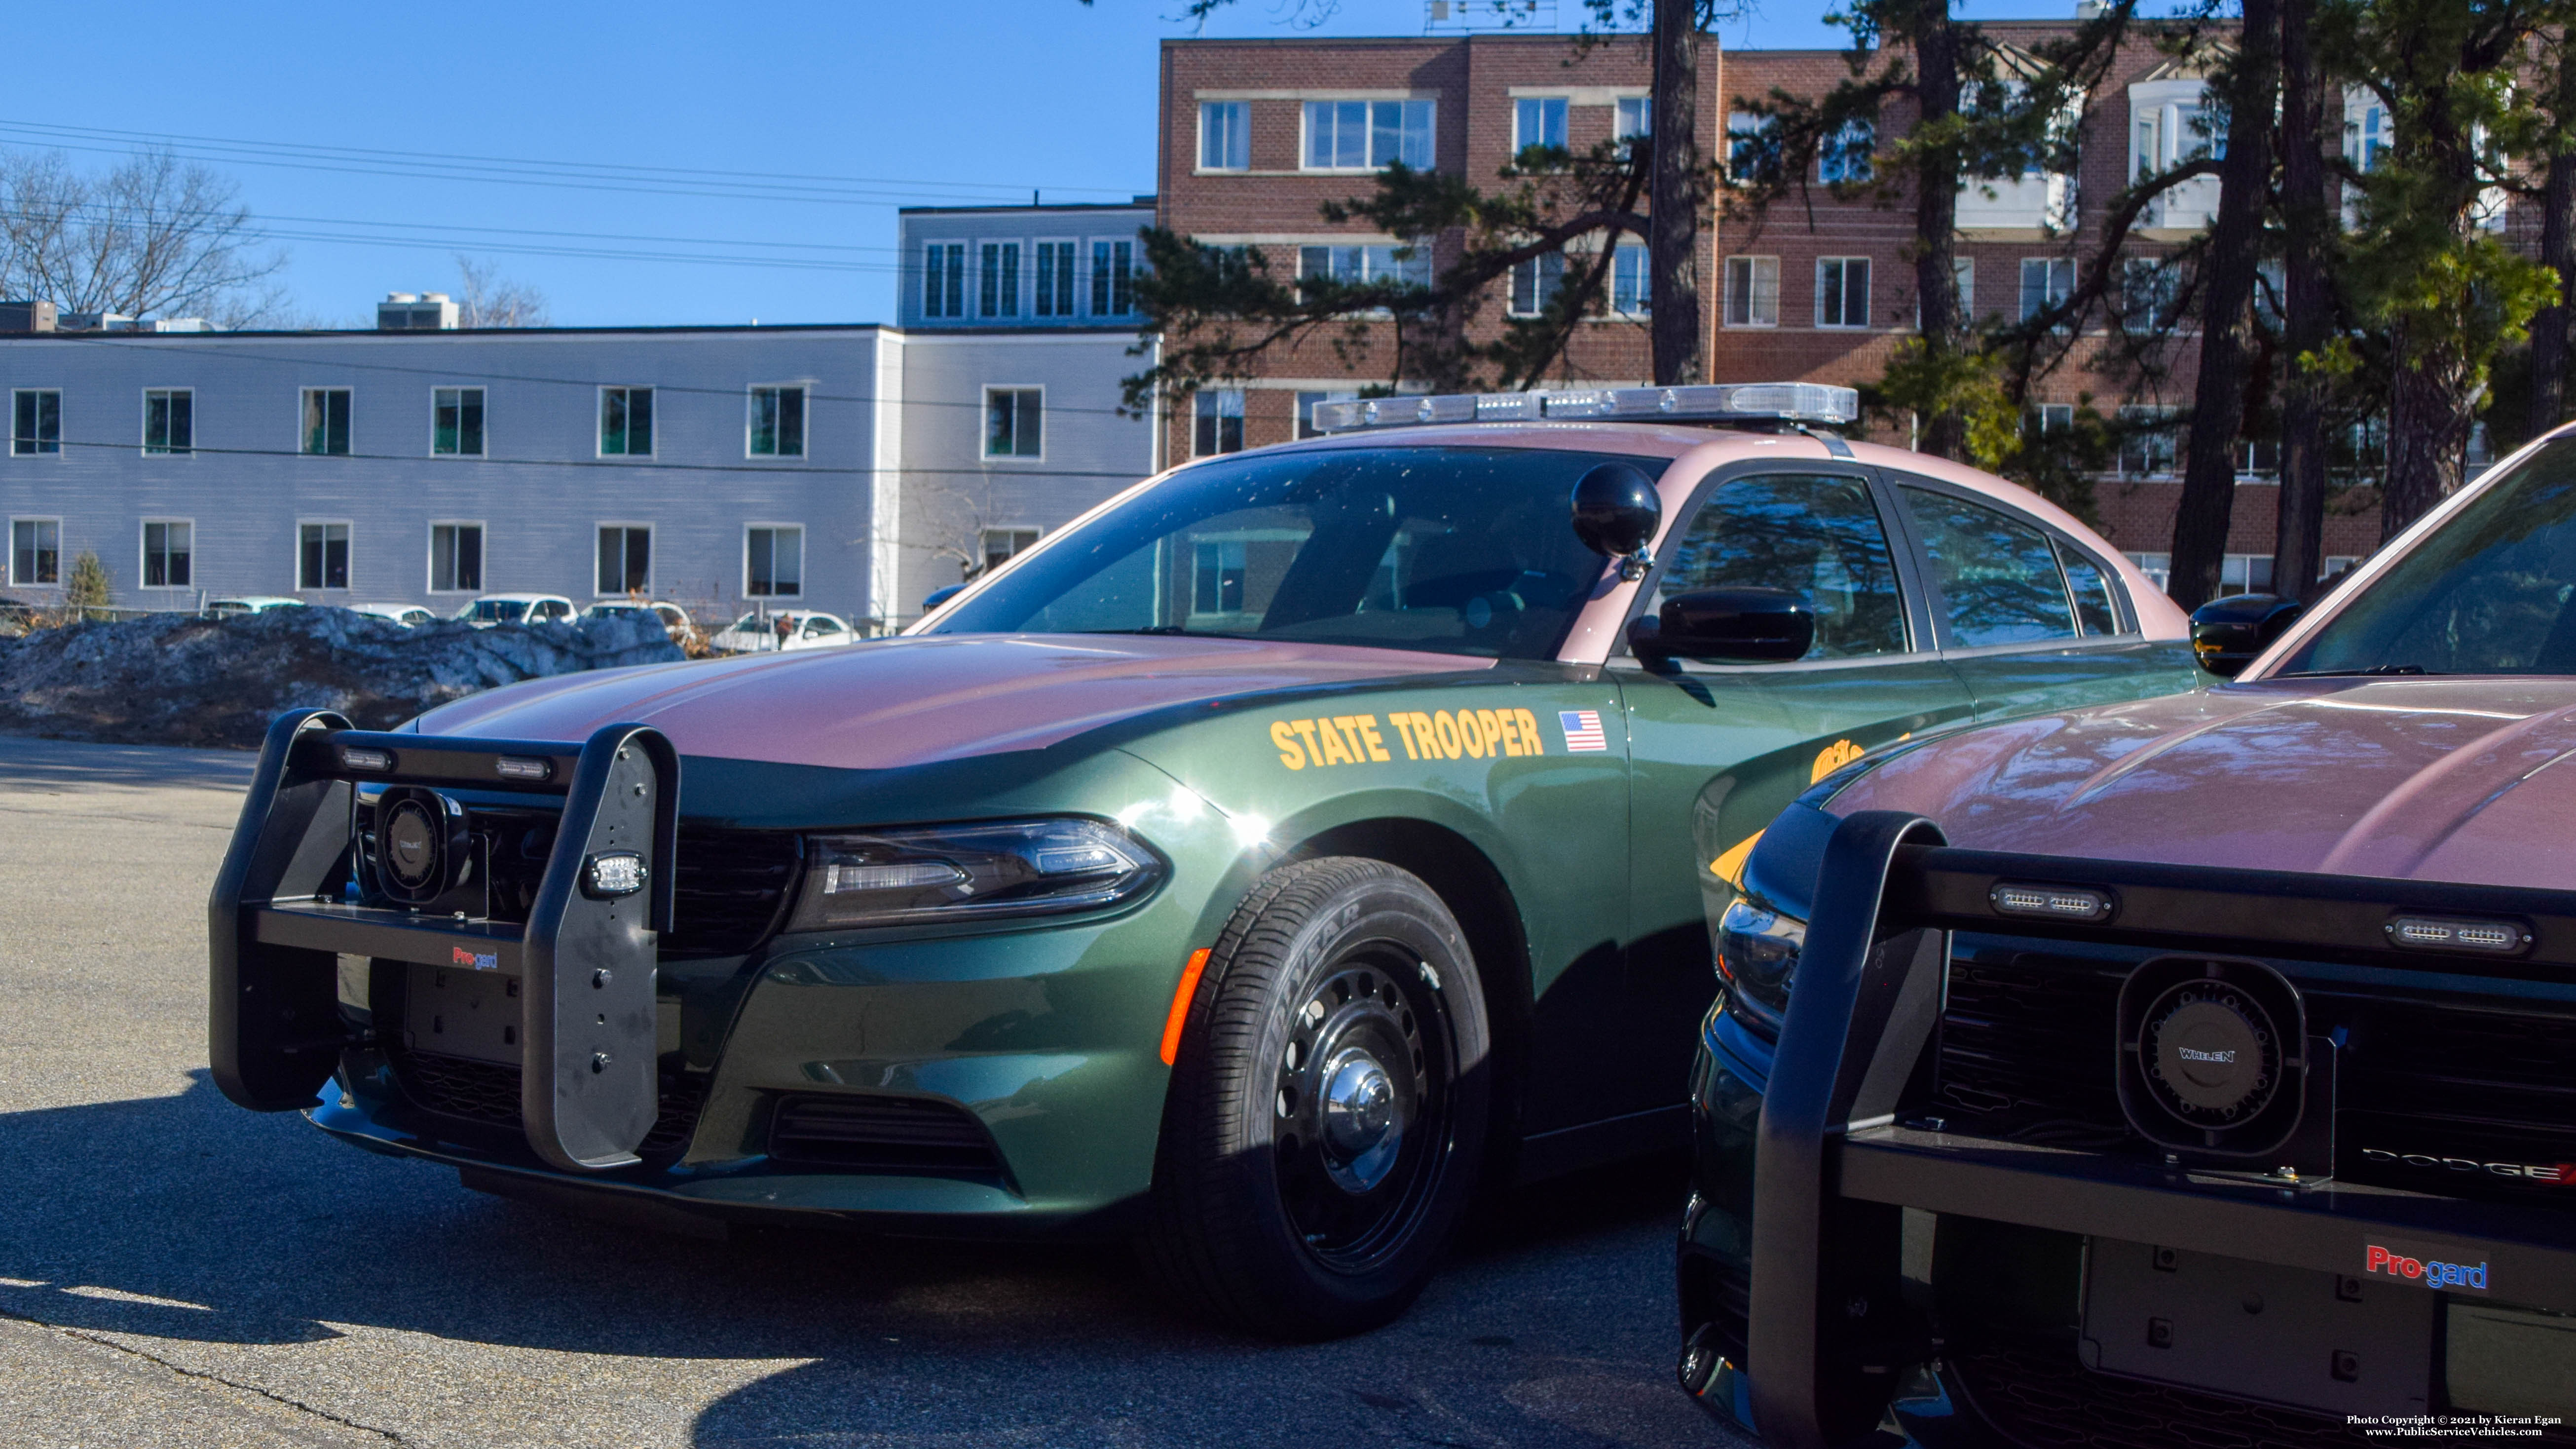 A photo  of New Hampshire State Police
            Cruiser 329, a 2020 Dodge Charger             taken by Kieran Egan